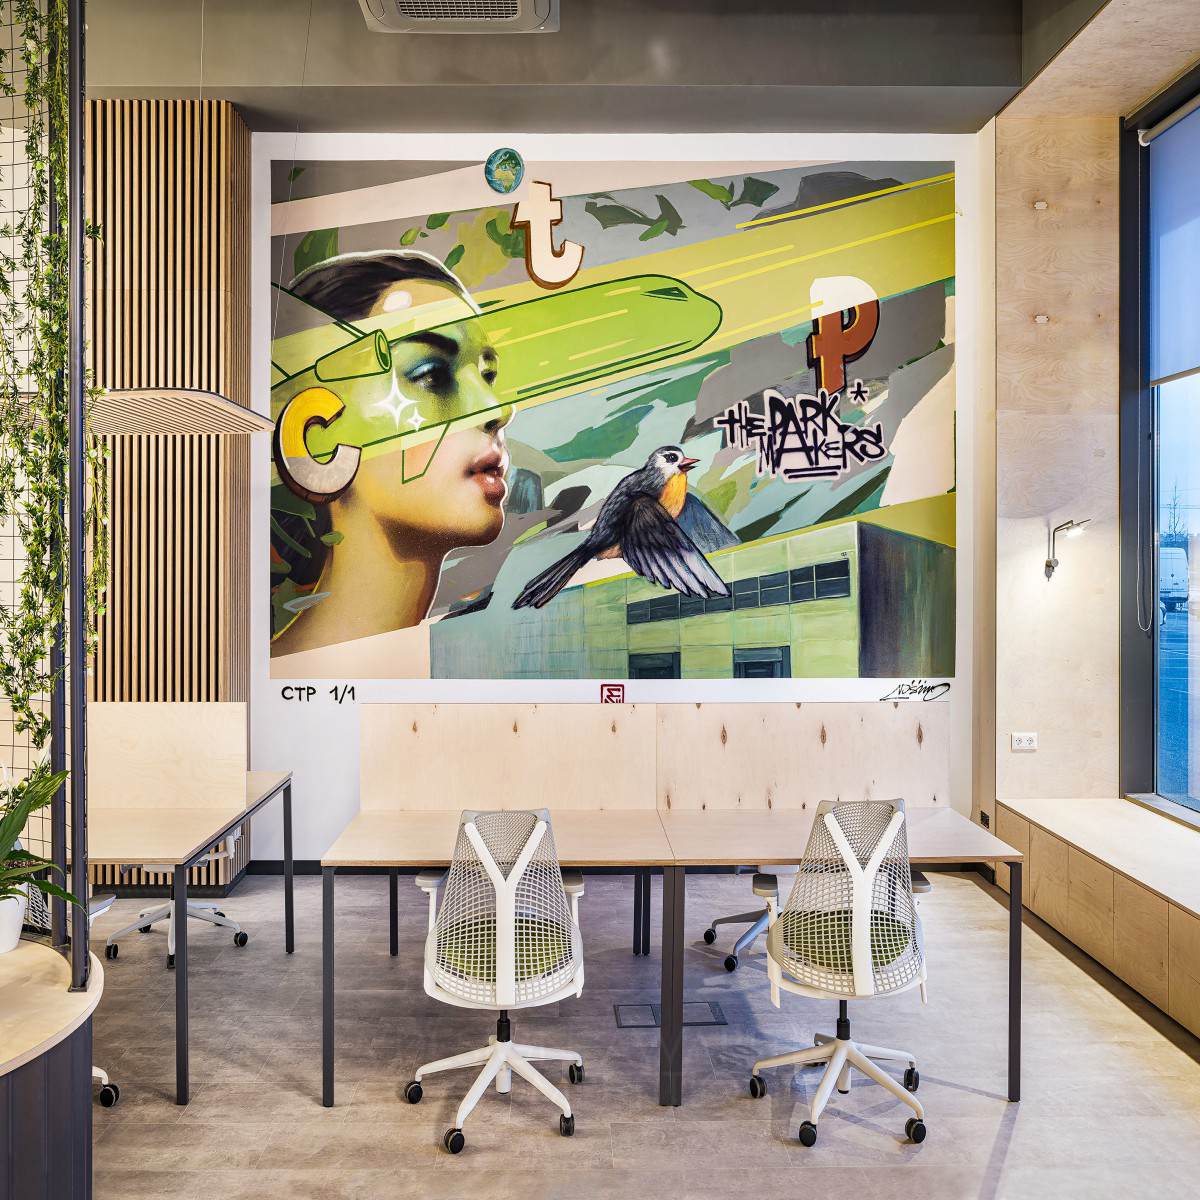 CTP Clubhouse Sofia  Clients Hub  by Helen Koss